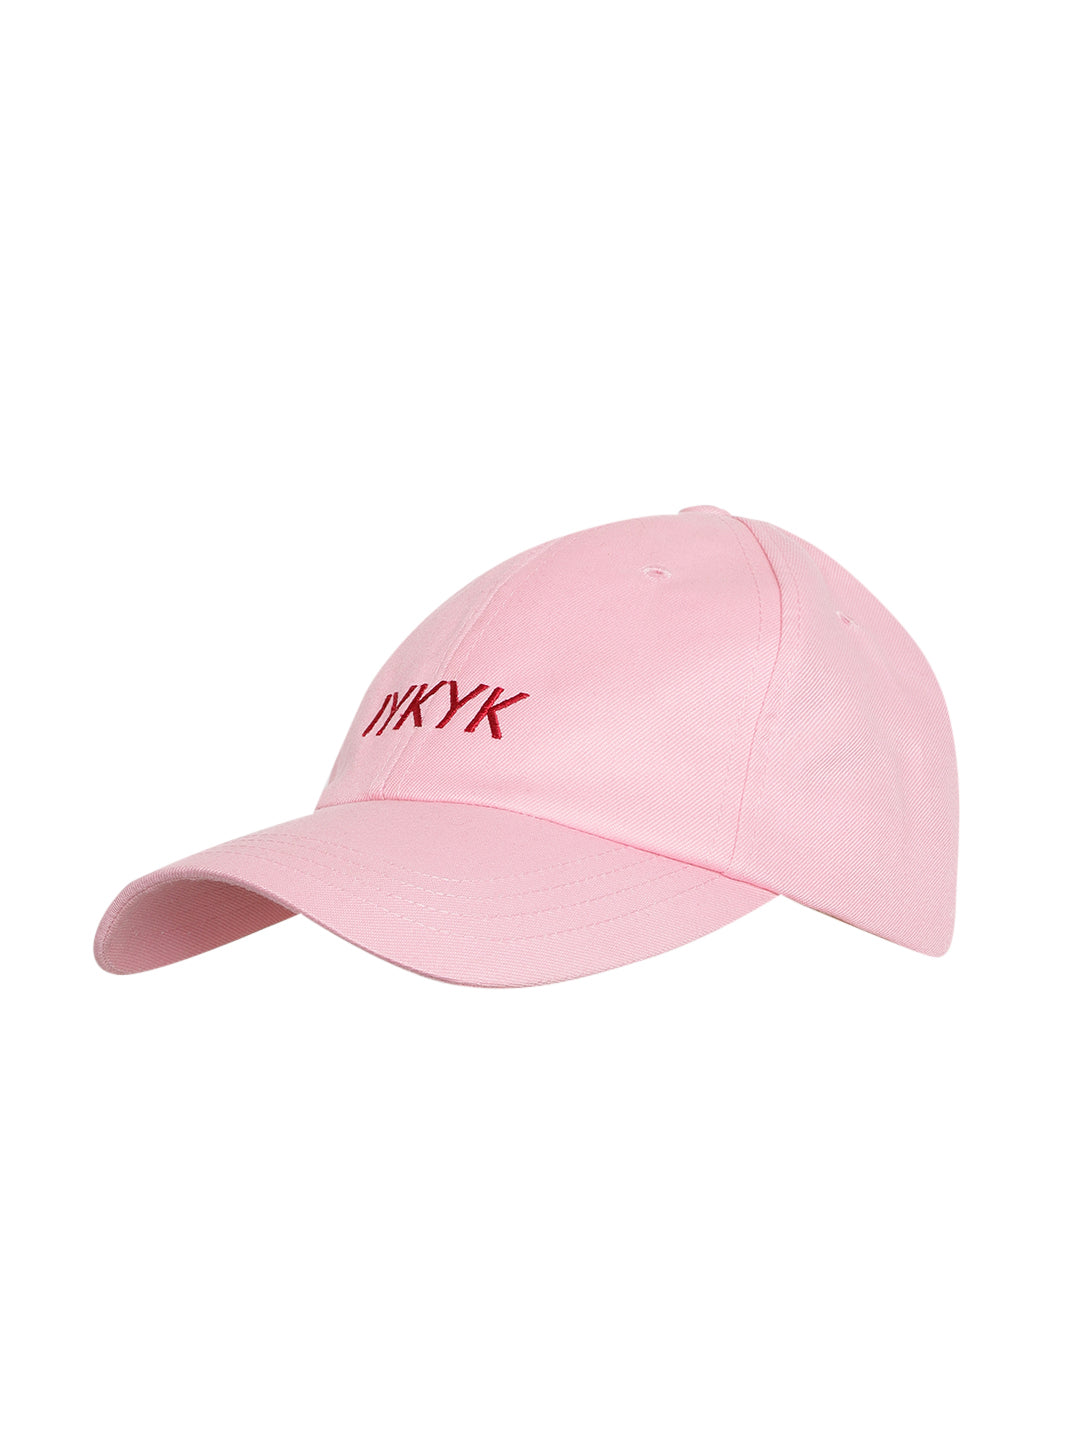 Blueberry pink IYKYK embroidered baseball cap